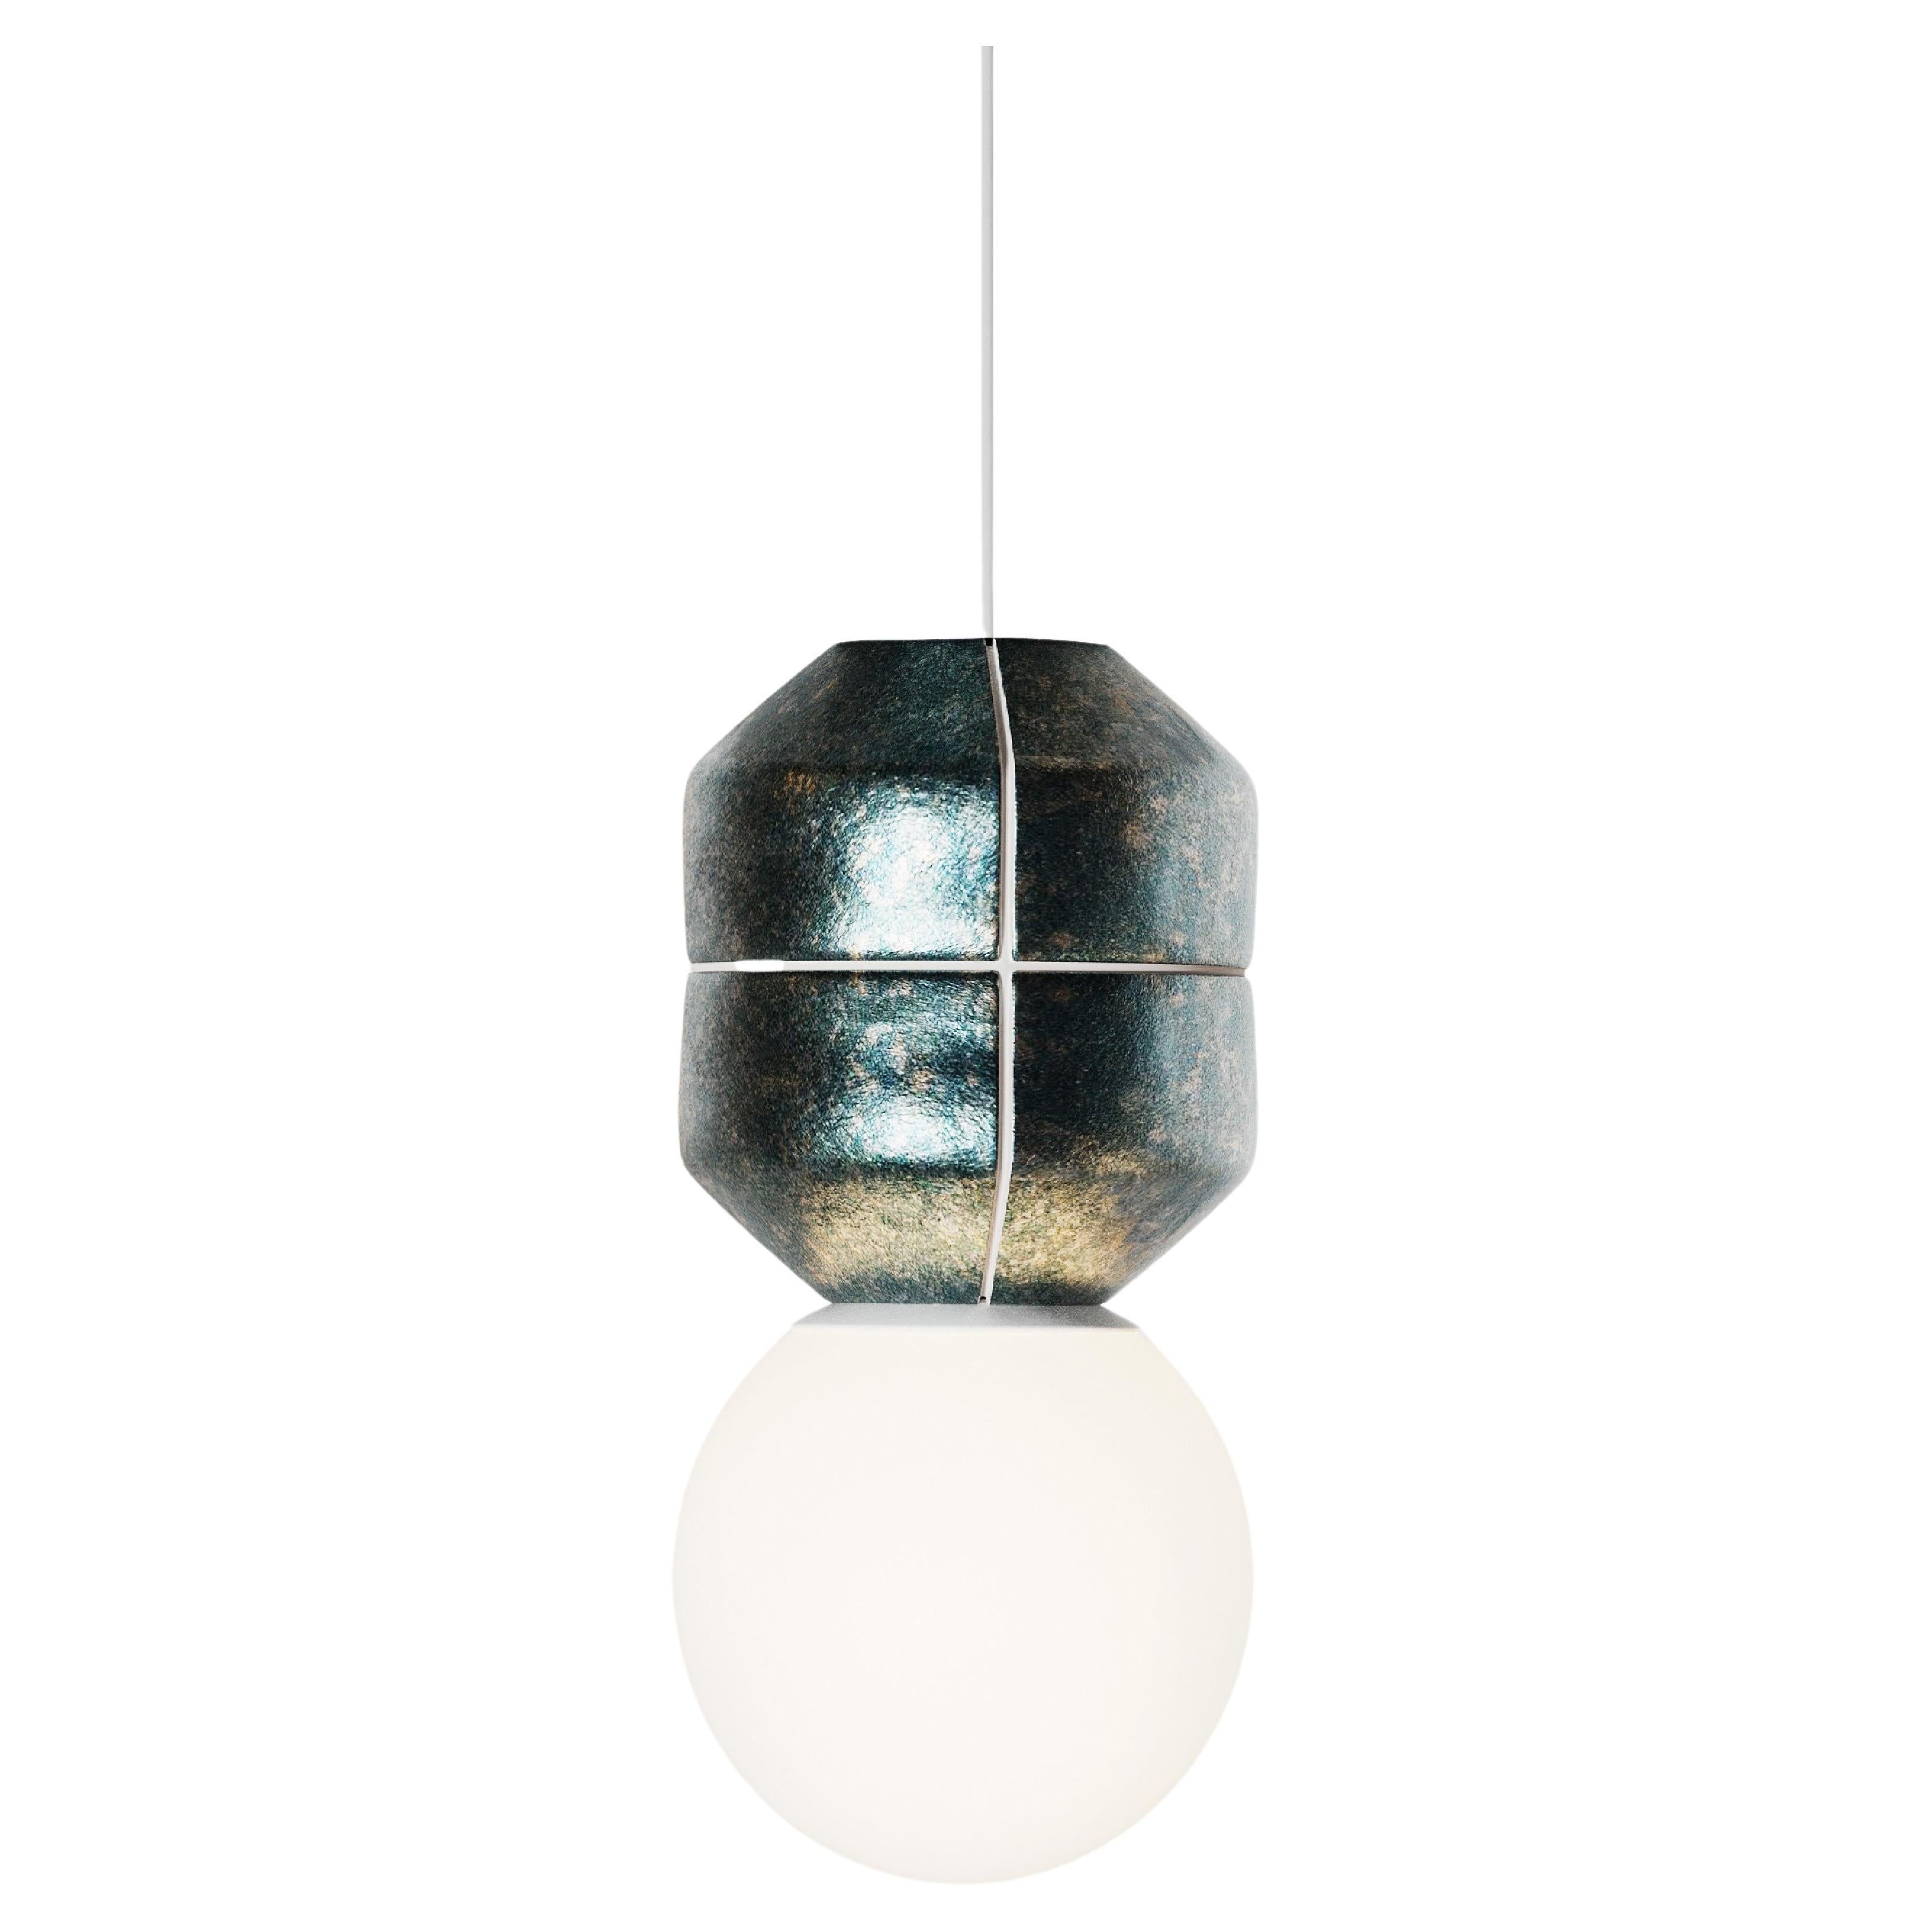 Product name: NAVAZI
Category: Lighting, Decoration
Type: Decoration, Floor lamp, Wall lamp, Pendant, Table lamp
Material: Ceramic/glass base, frosted glass, textile cable
Light source: G9, 110-220V
Designer: Artem